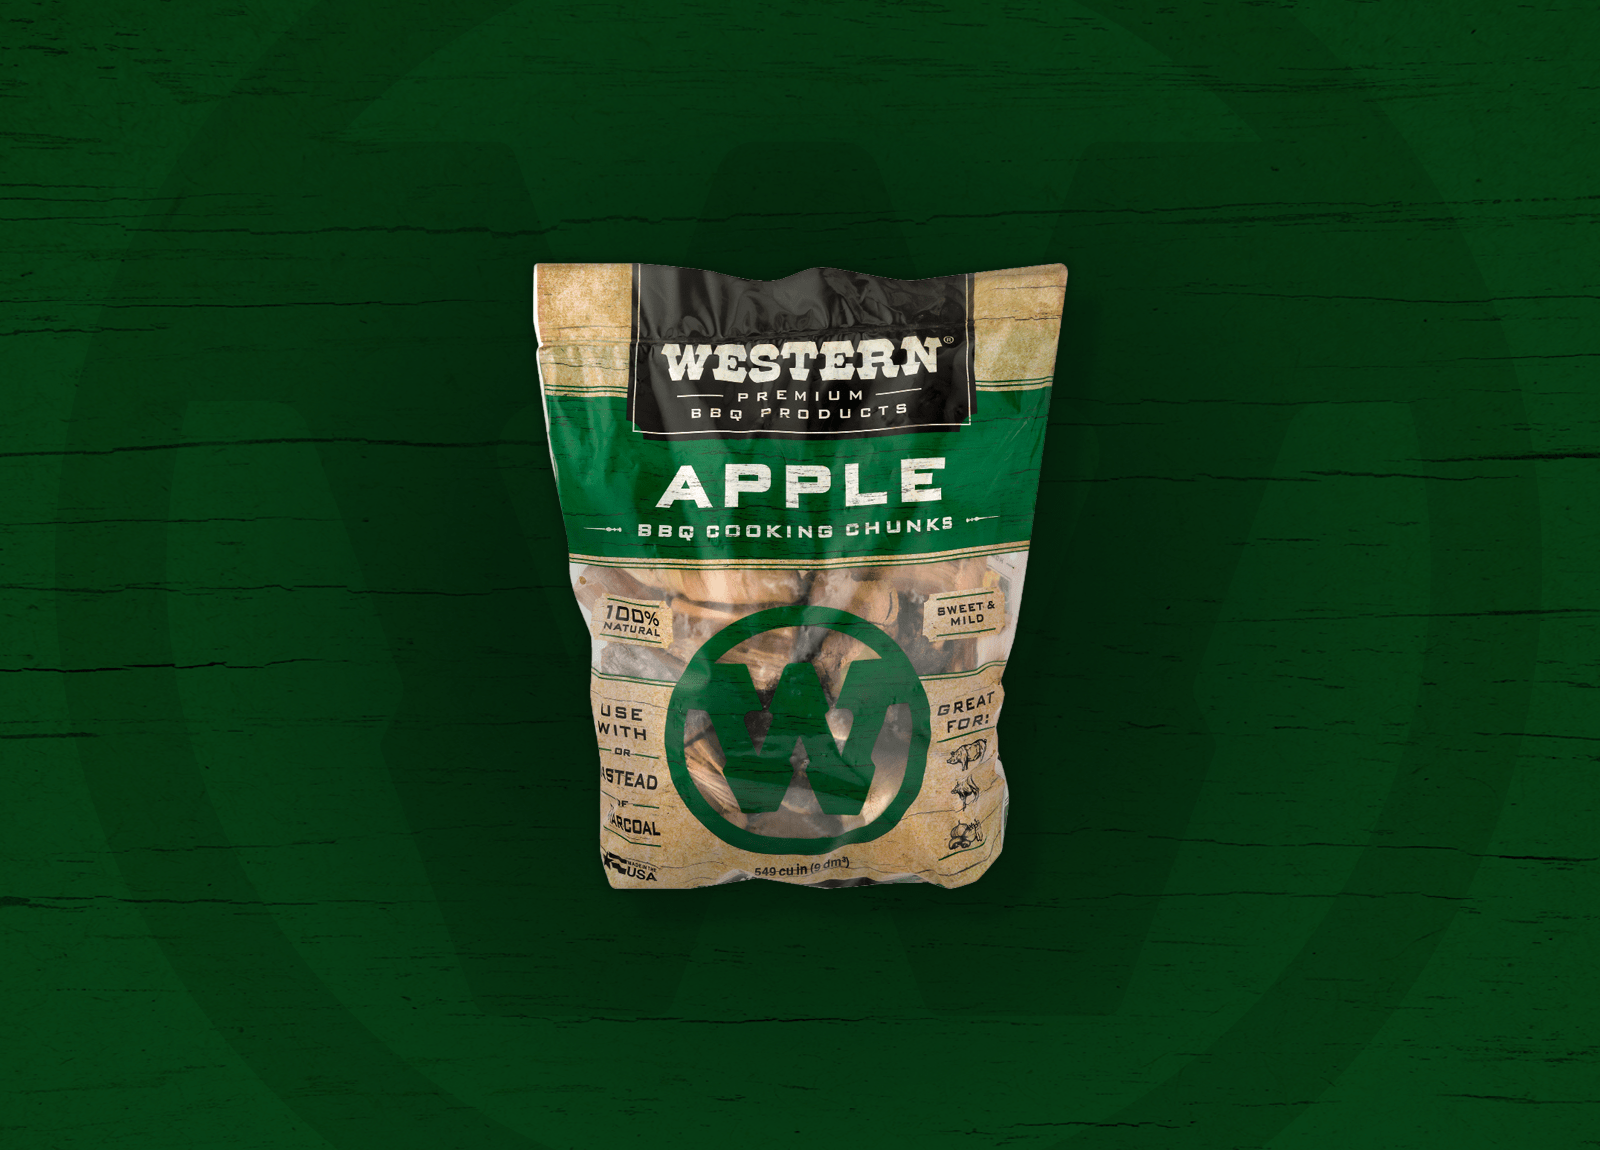 Western Apple Cooking Chunks